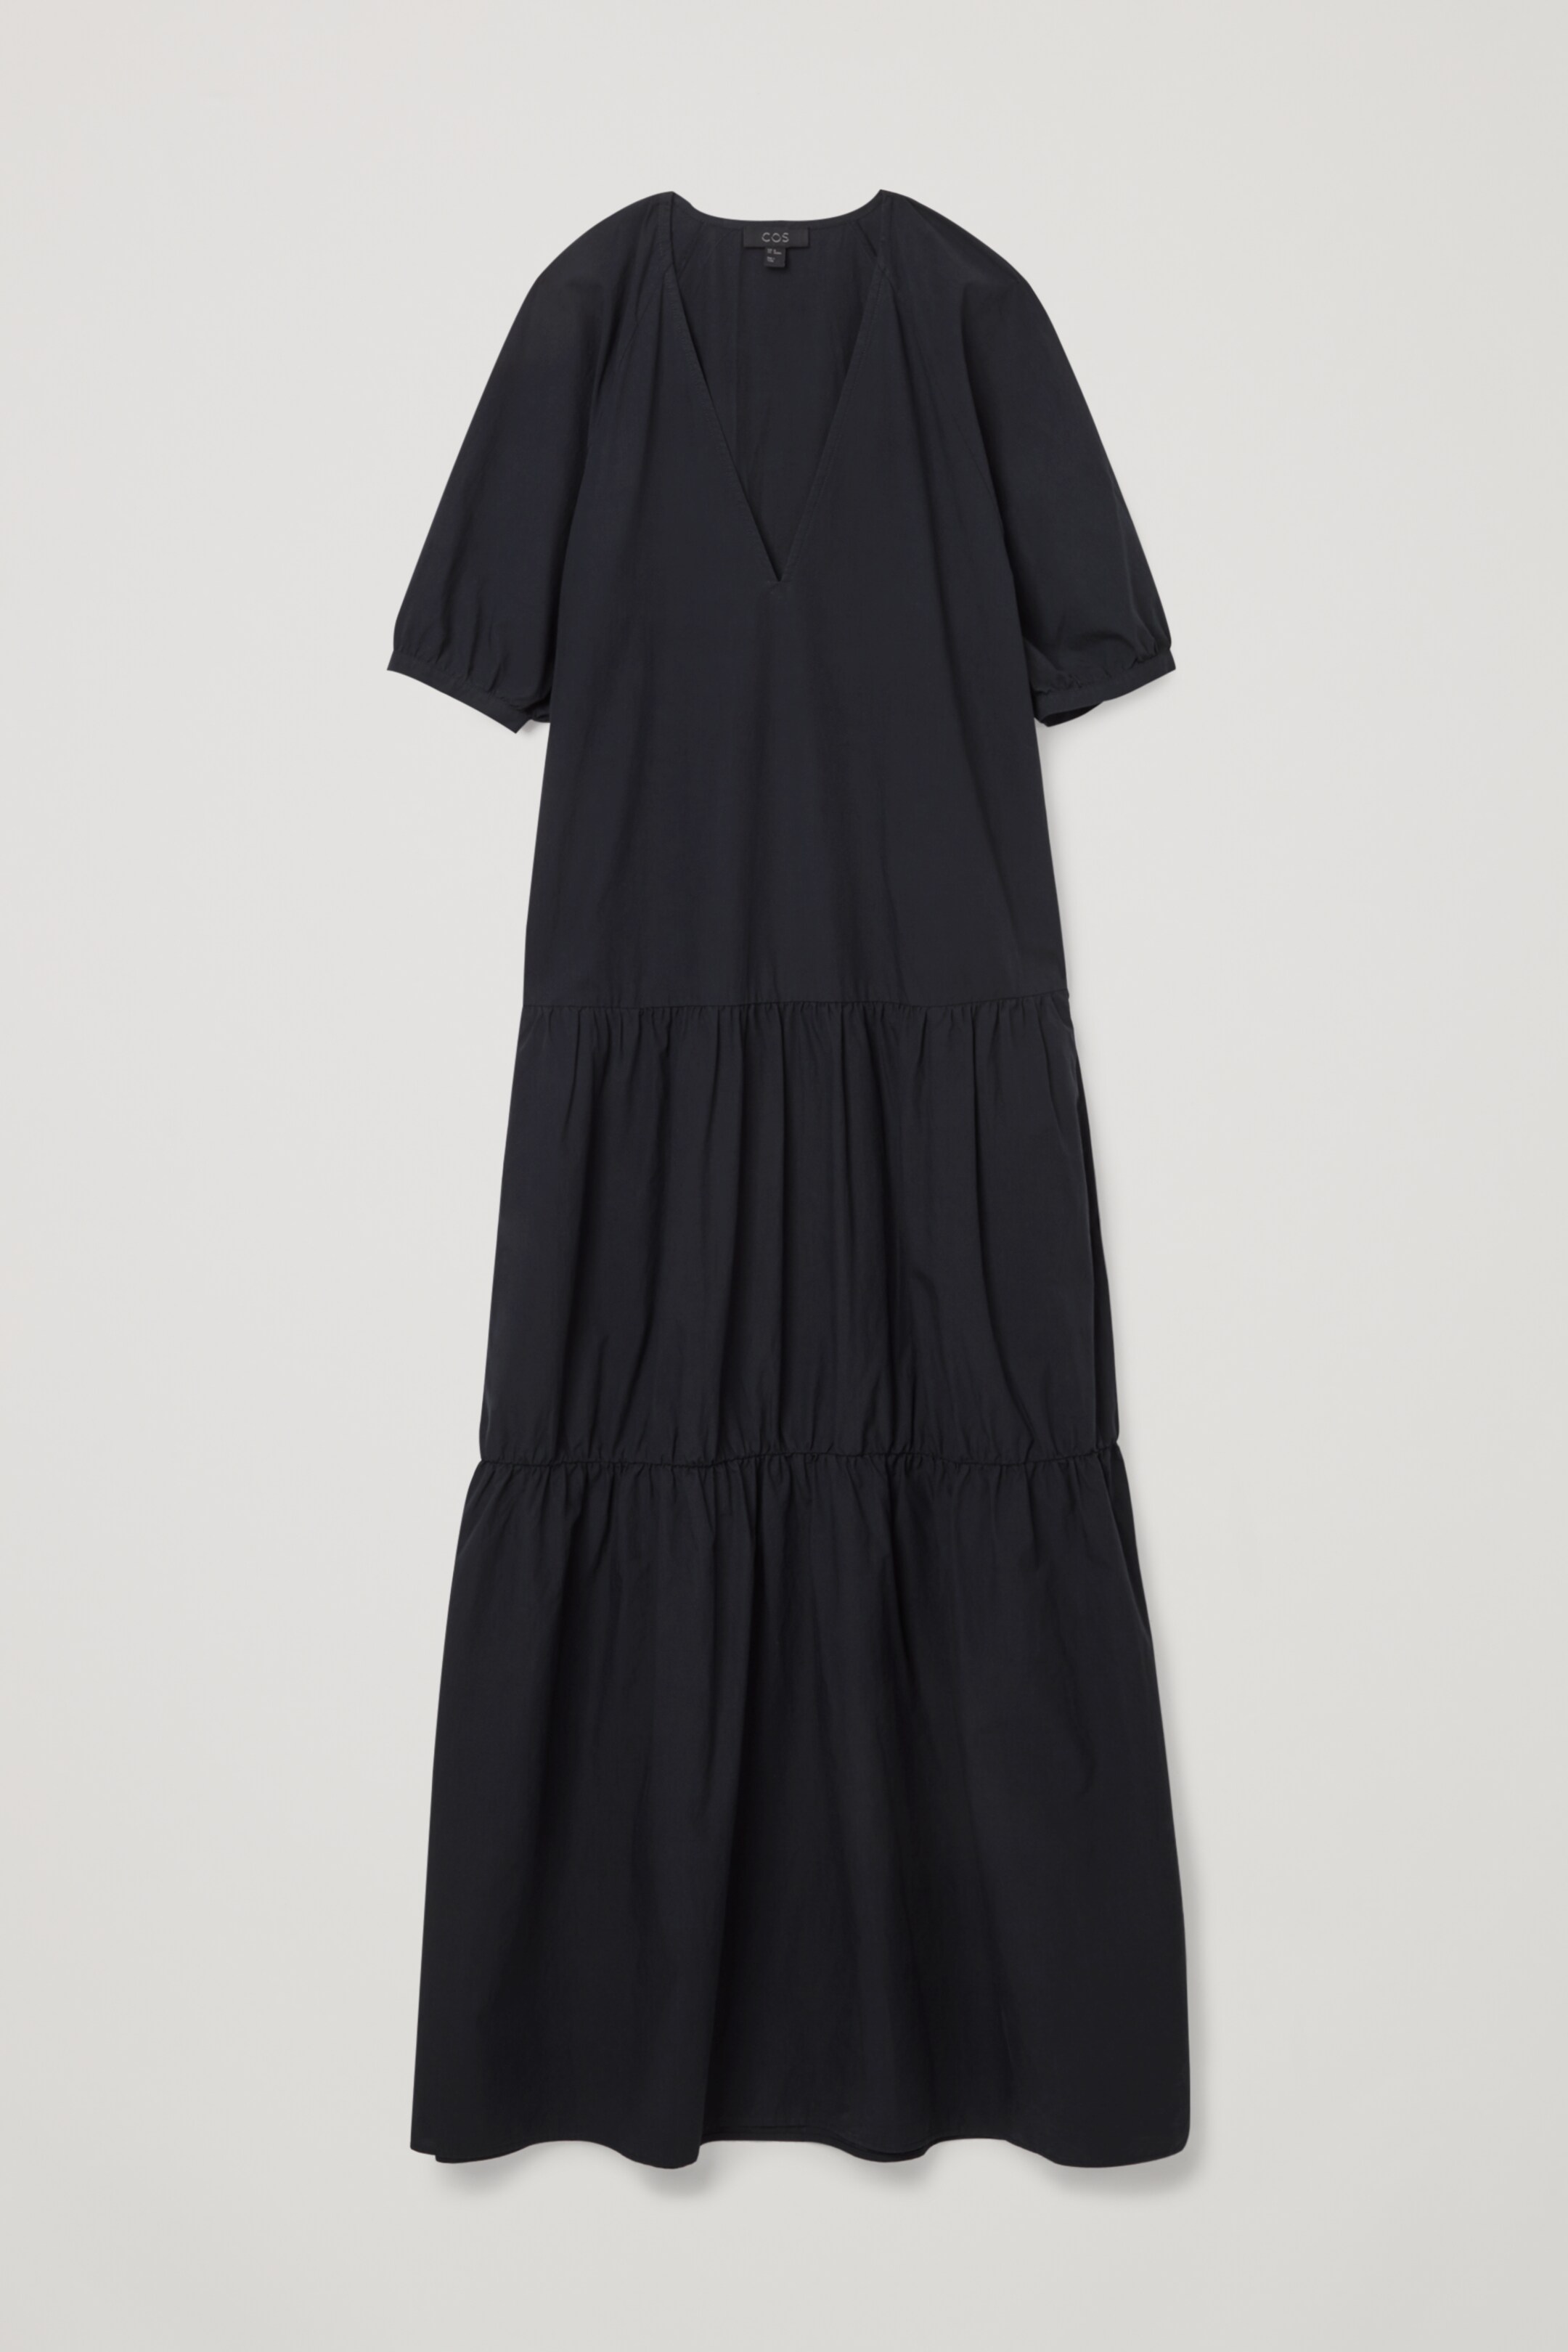 Front image of cos TIERED MAXI DRESS in dark navy